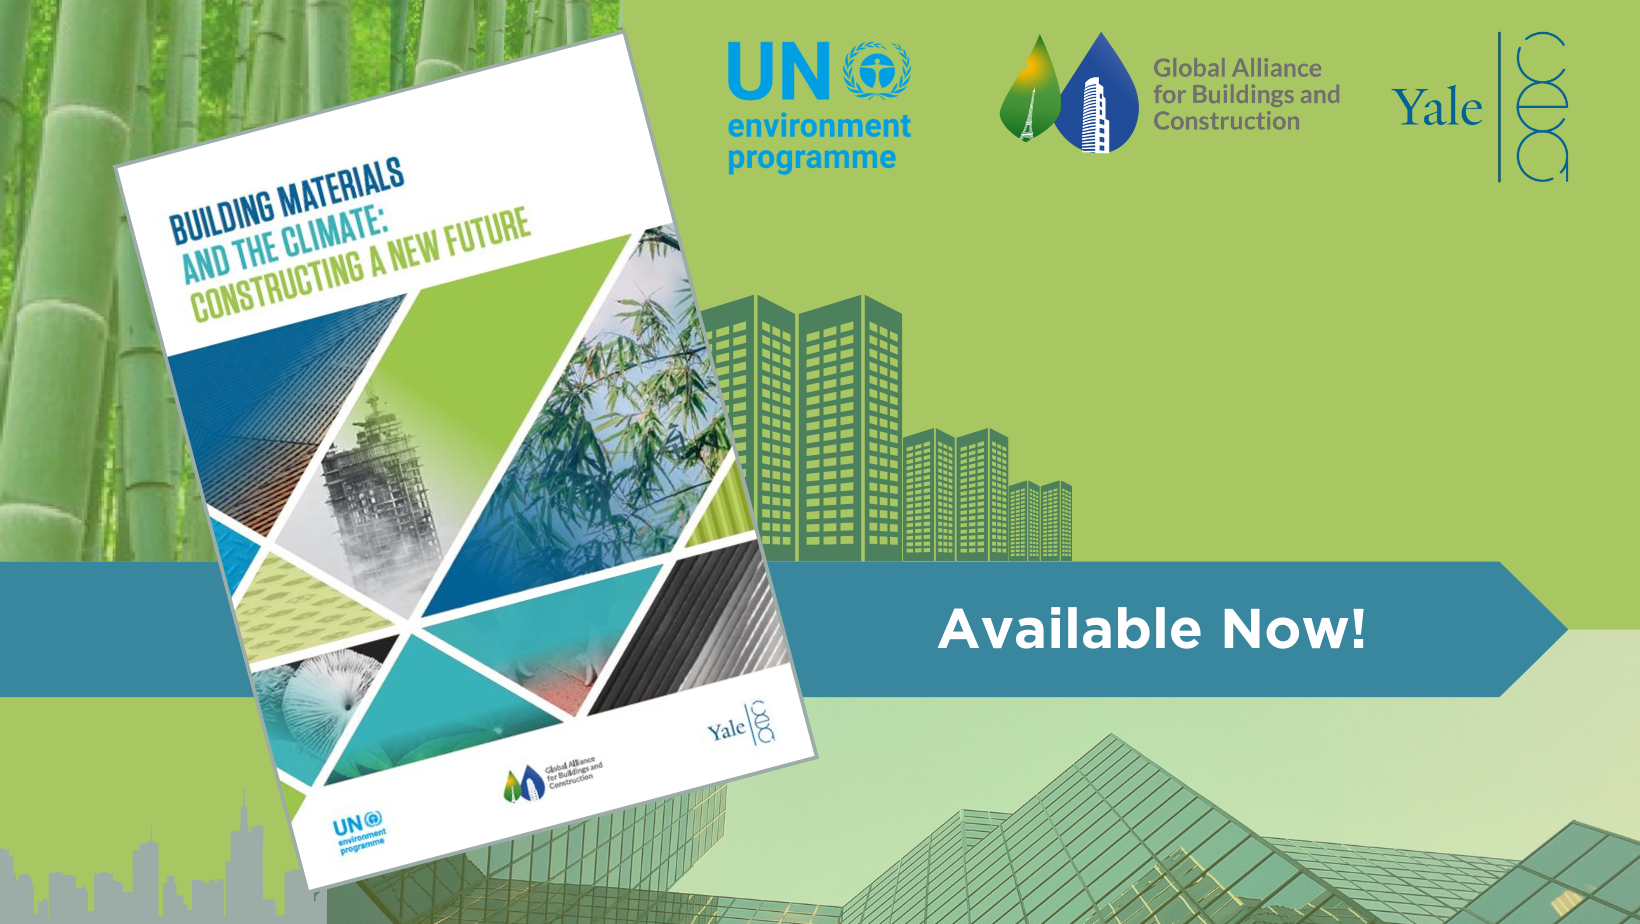 GlobalABC report “Building Materials and the Climate: Constructing a New Future”